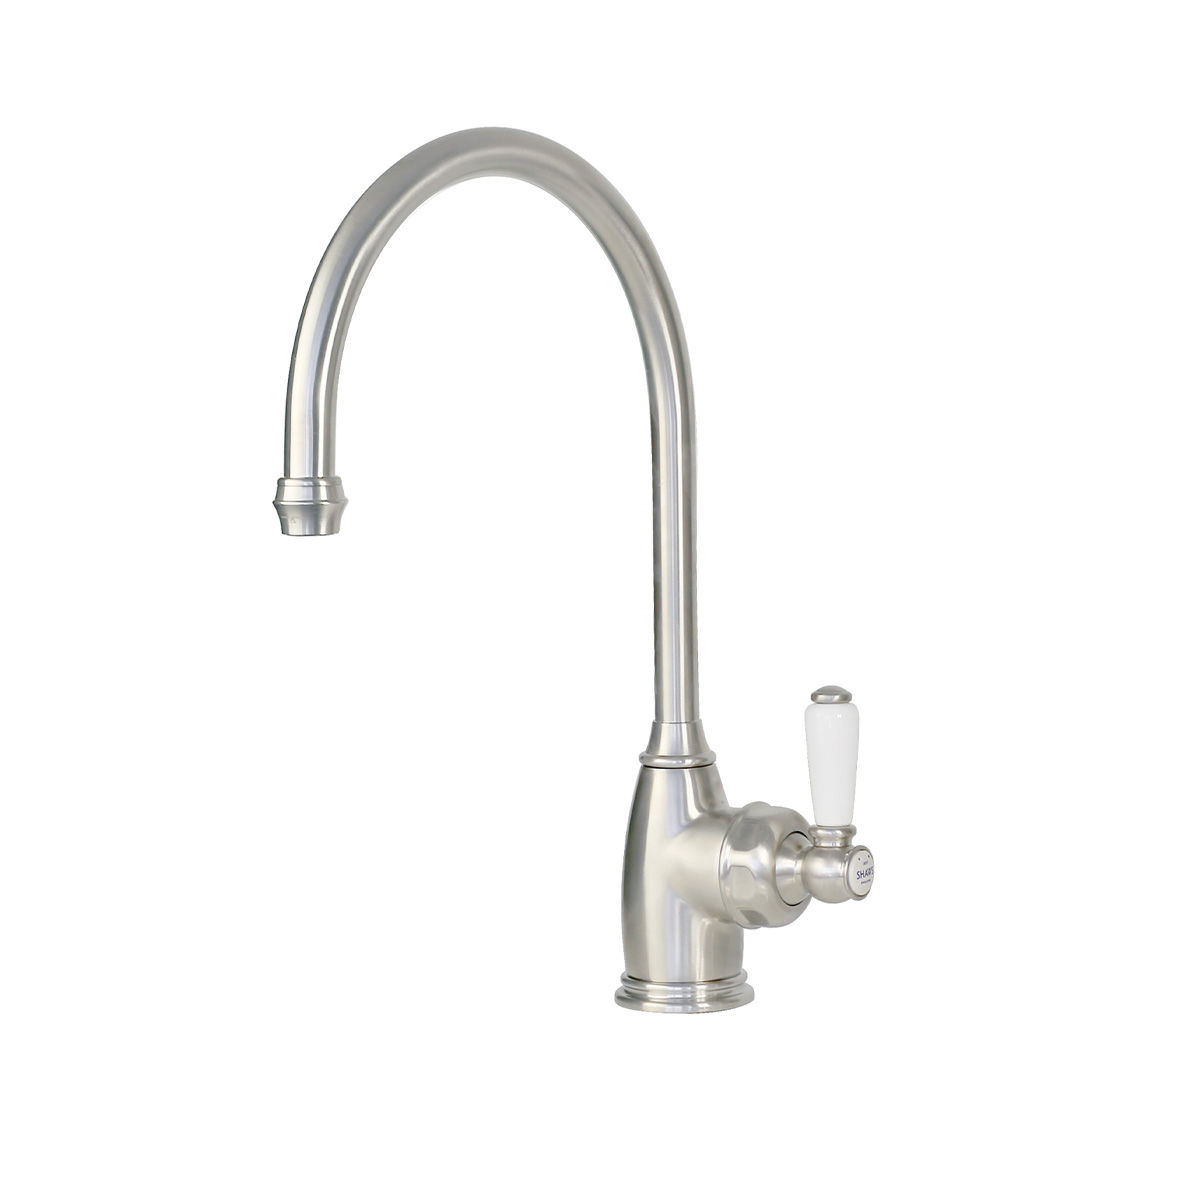 Shaws by Perrin & Rowe Yarrow kitchen mixer in Pewter. Parthian style monobloc kitchen tap AUSH.4341. Distributed in Australia by Luxe by Design, Brisbane.